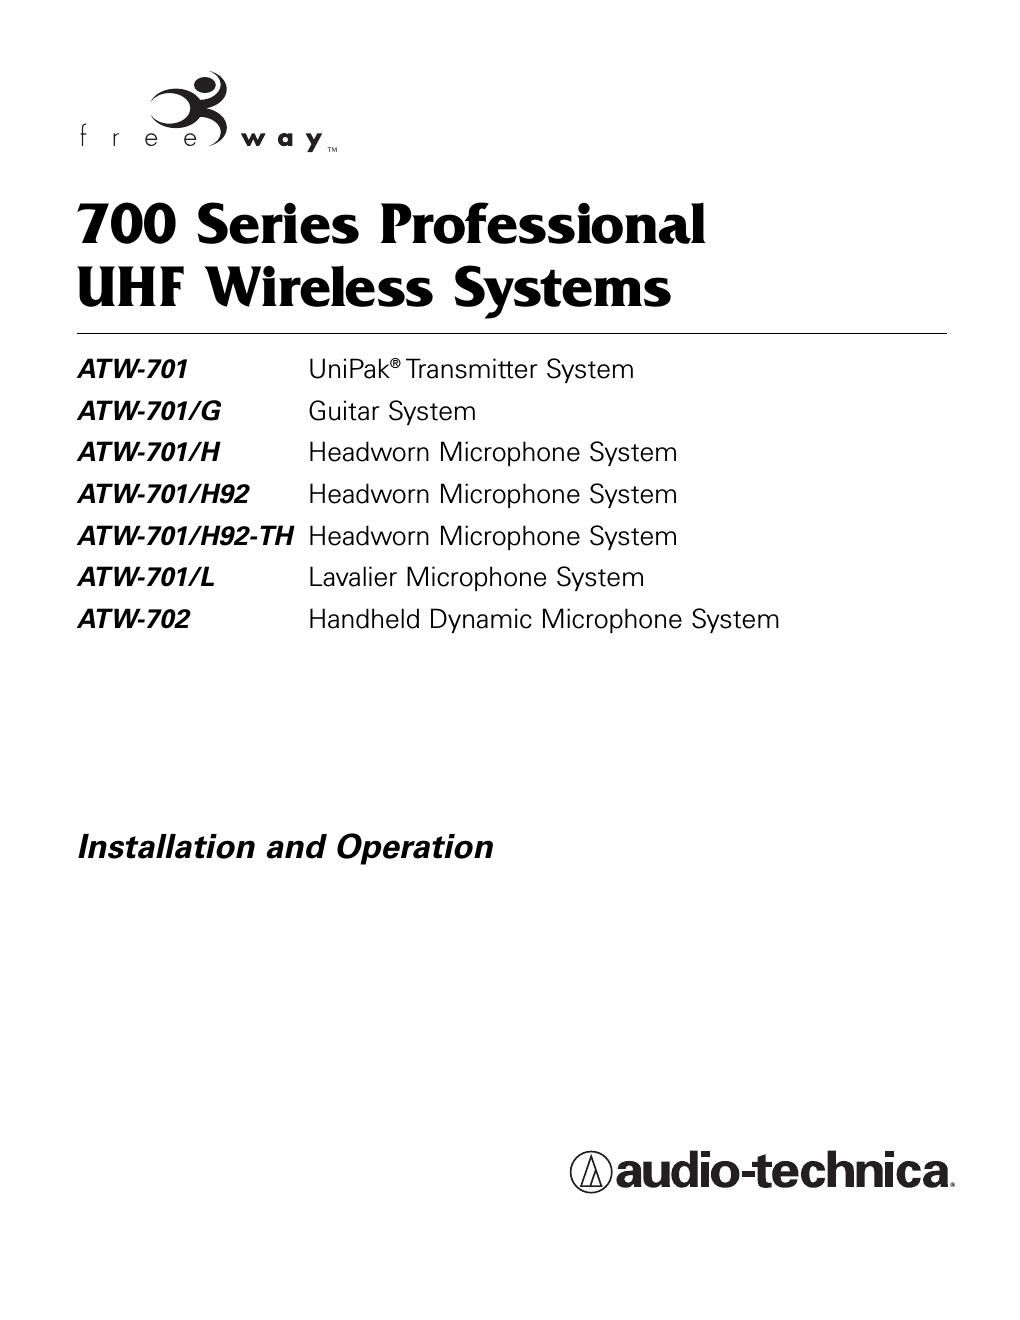 audio technica atw 701 h92 th owners manual